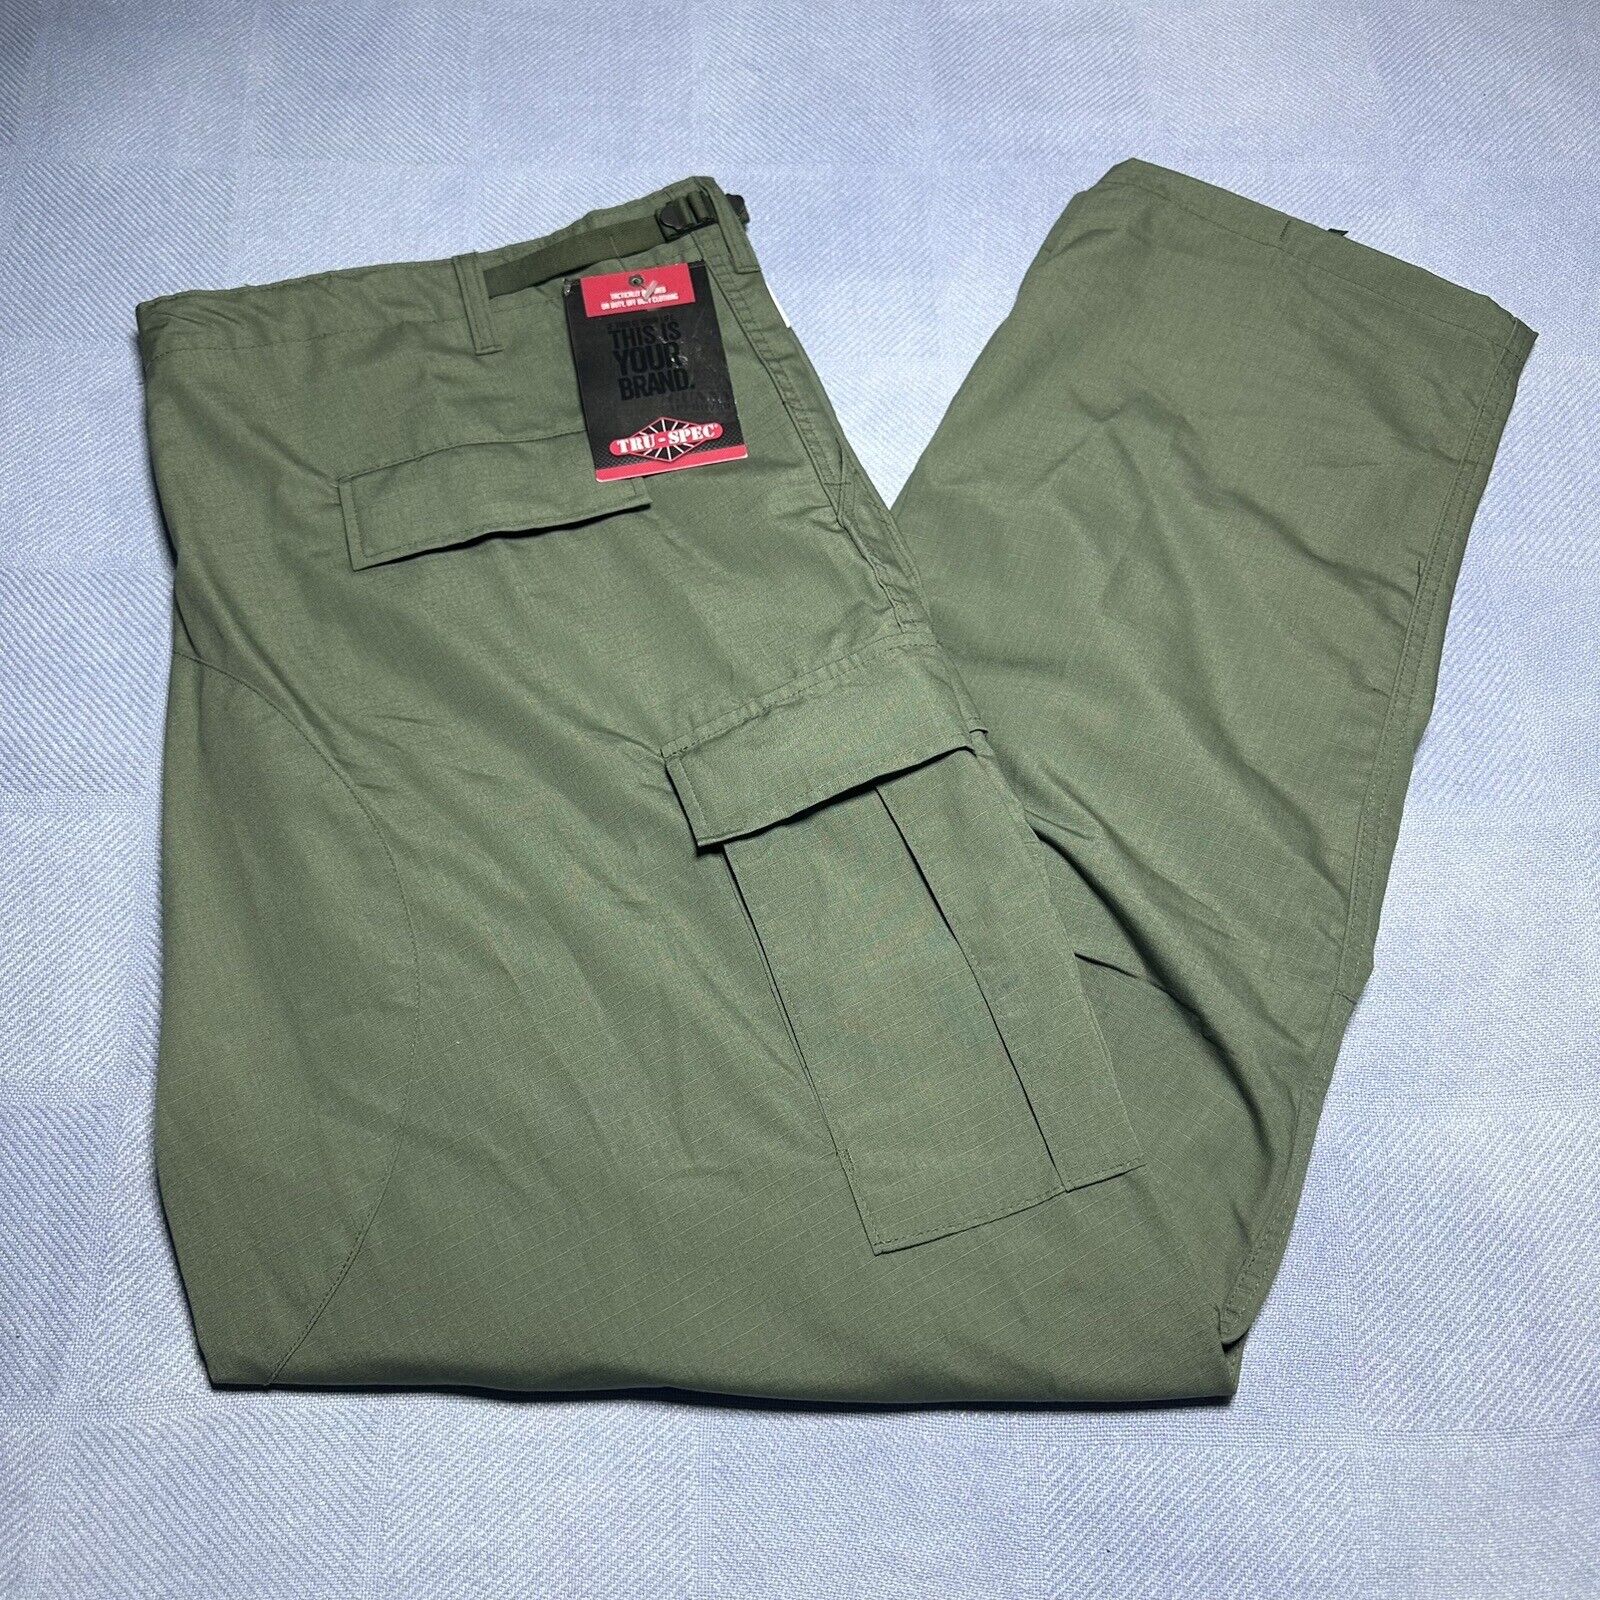 Tru-Spec Cargo Utility Military Tactical Green Ribstop Pants 3XL Large Long